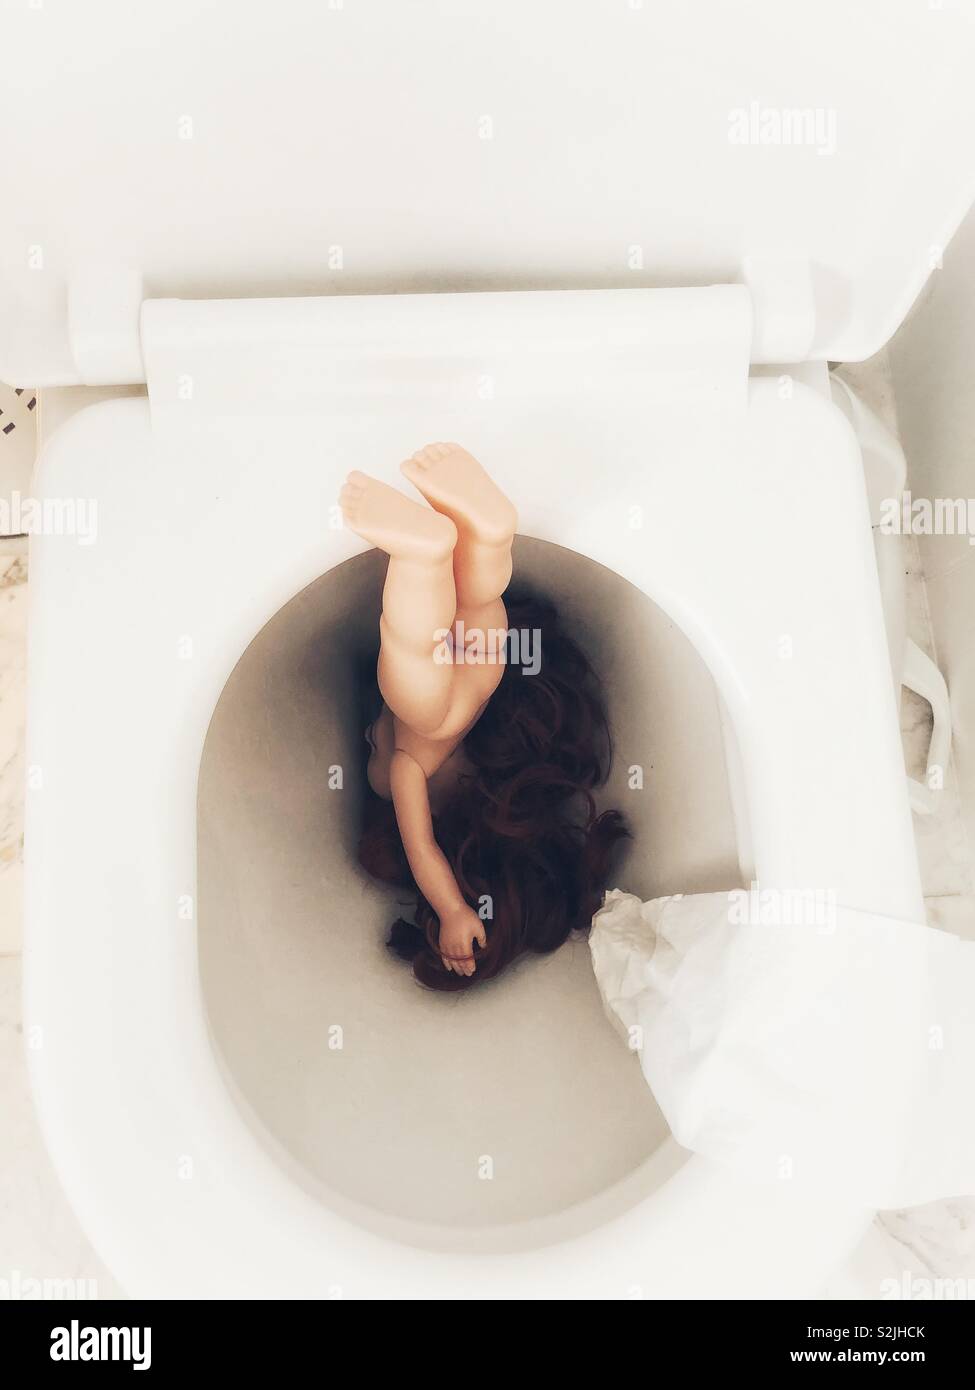 Doll flushed down a toilet Stock Photo